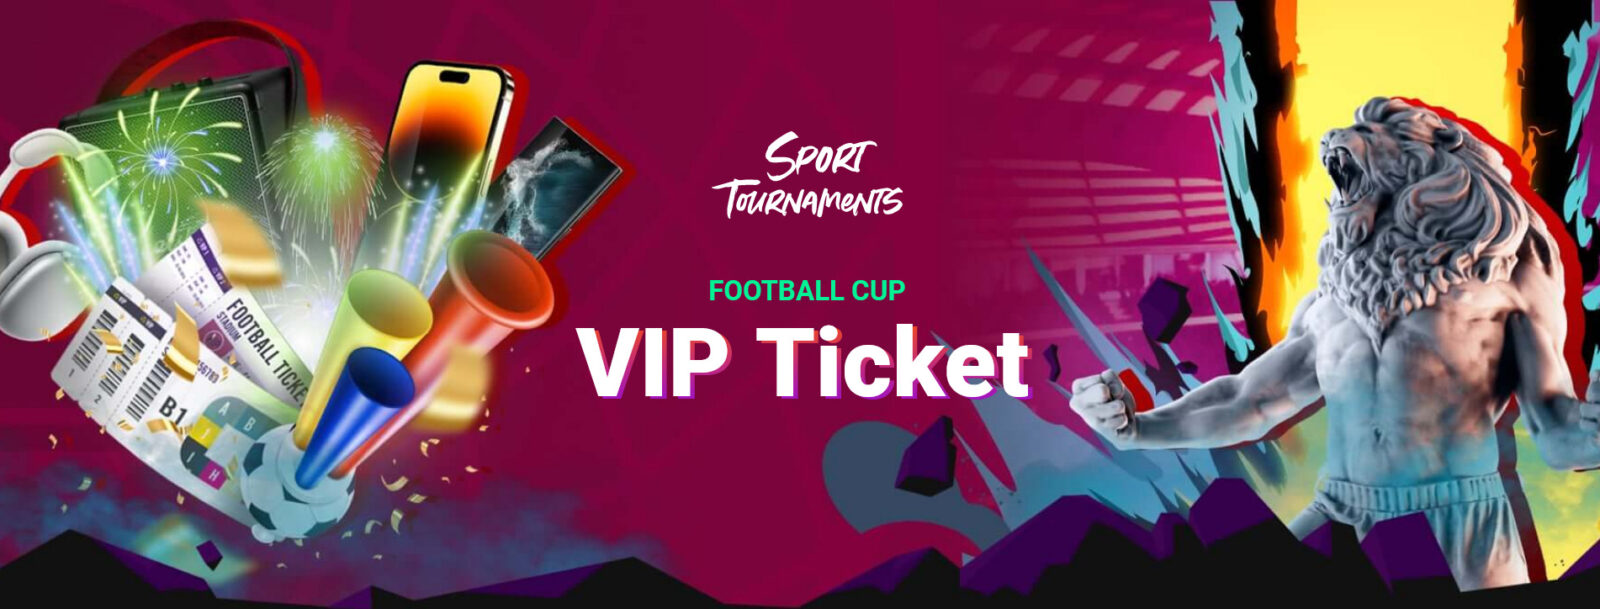 #Sports Tournament - #WorldCup2022 - #VIPTicket